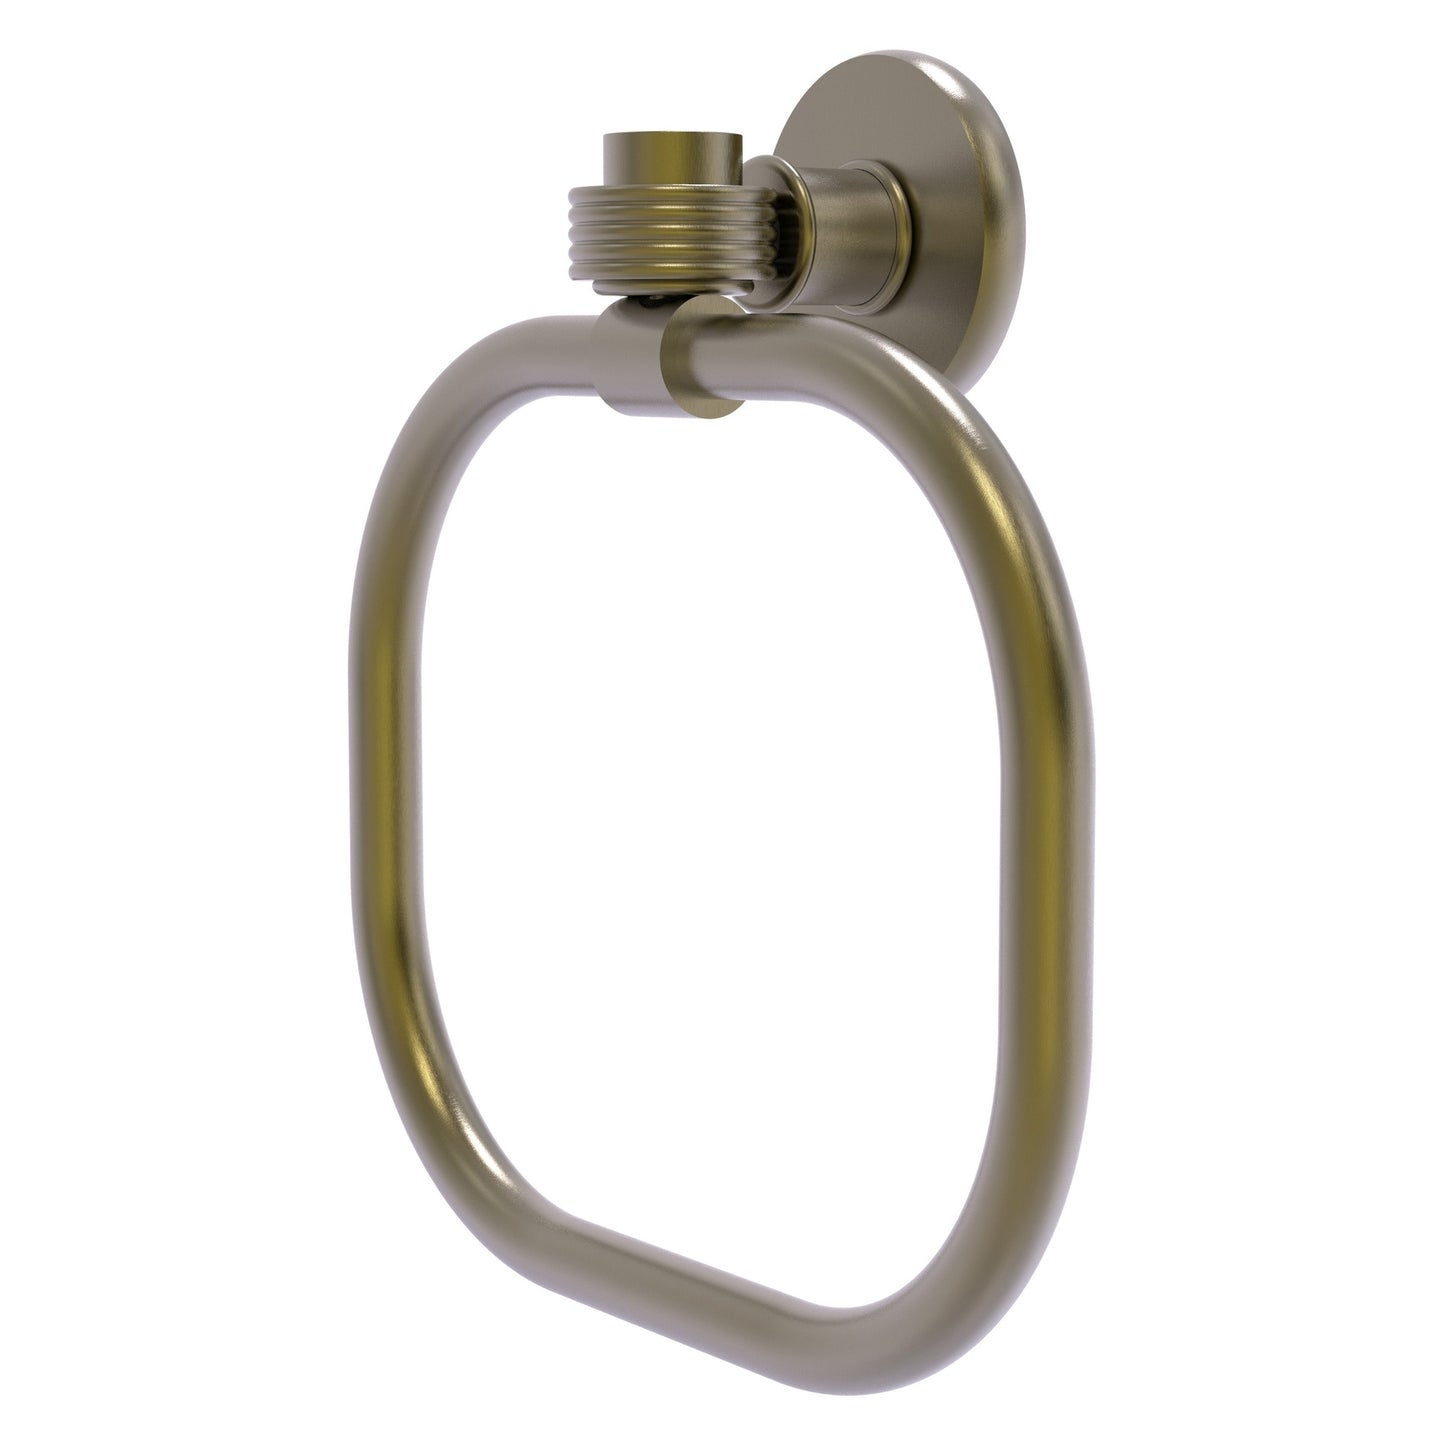 Allied Brass Skyline 2016G 9" Antique Brass Solid Brass Towel Ring With Grooved Accents